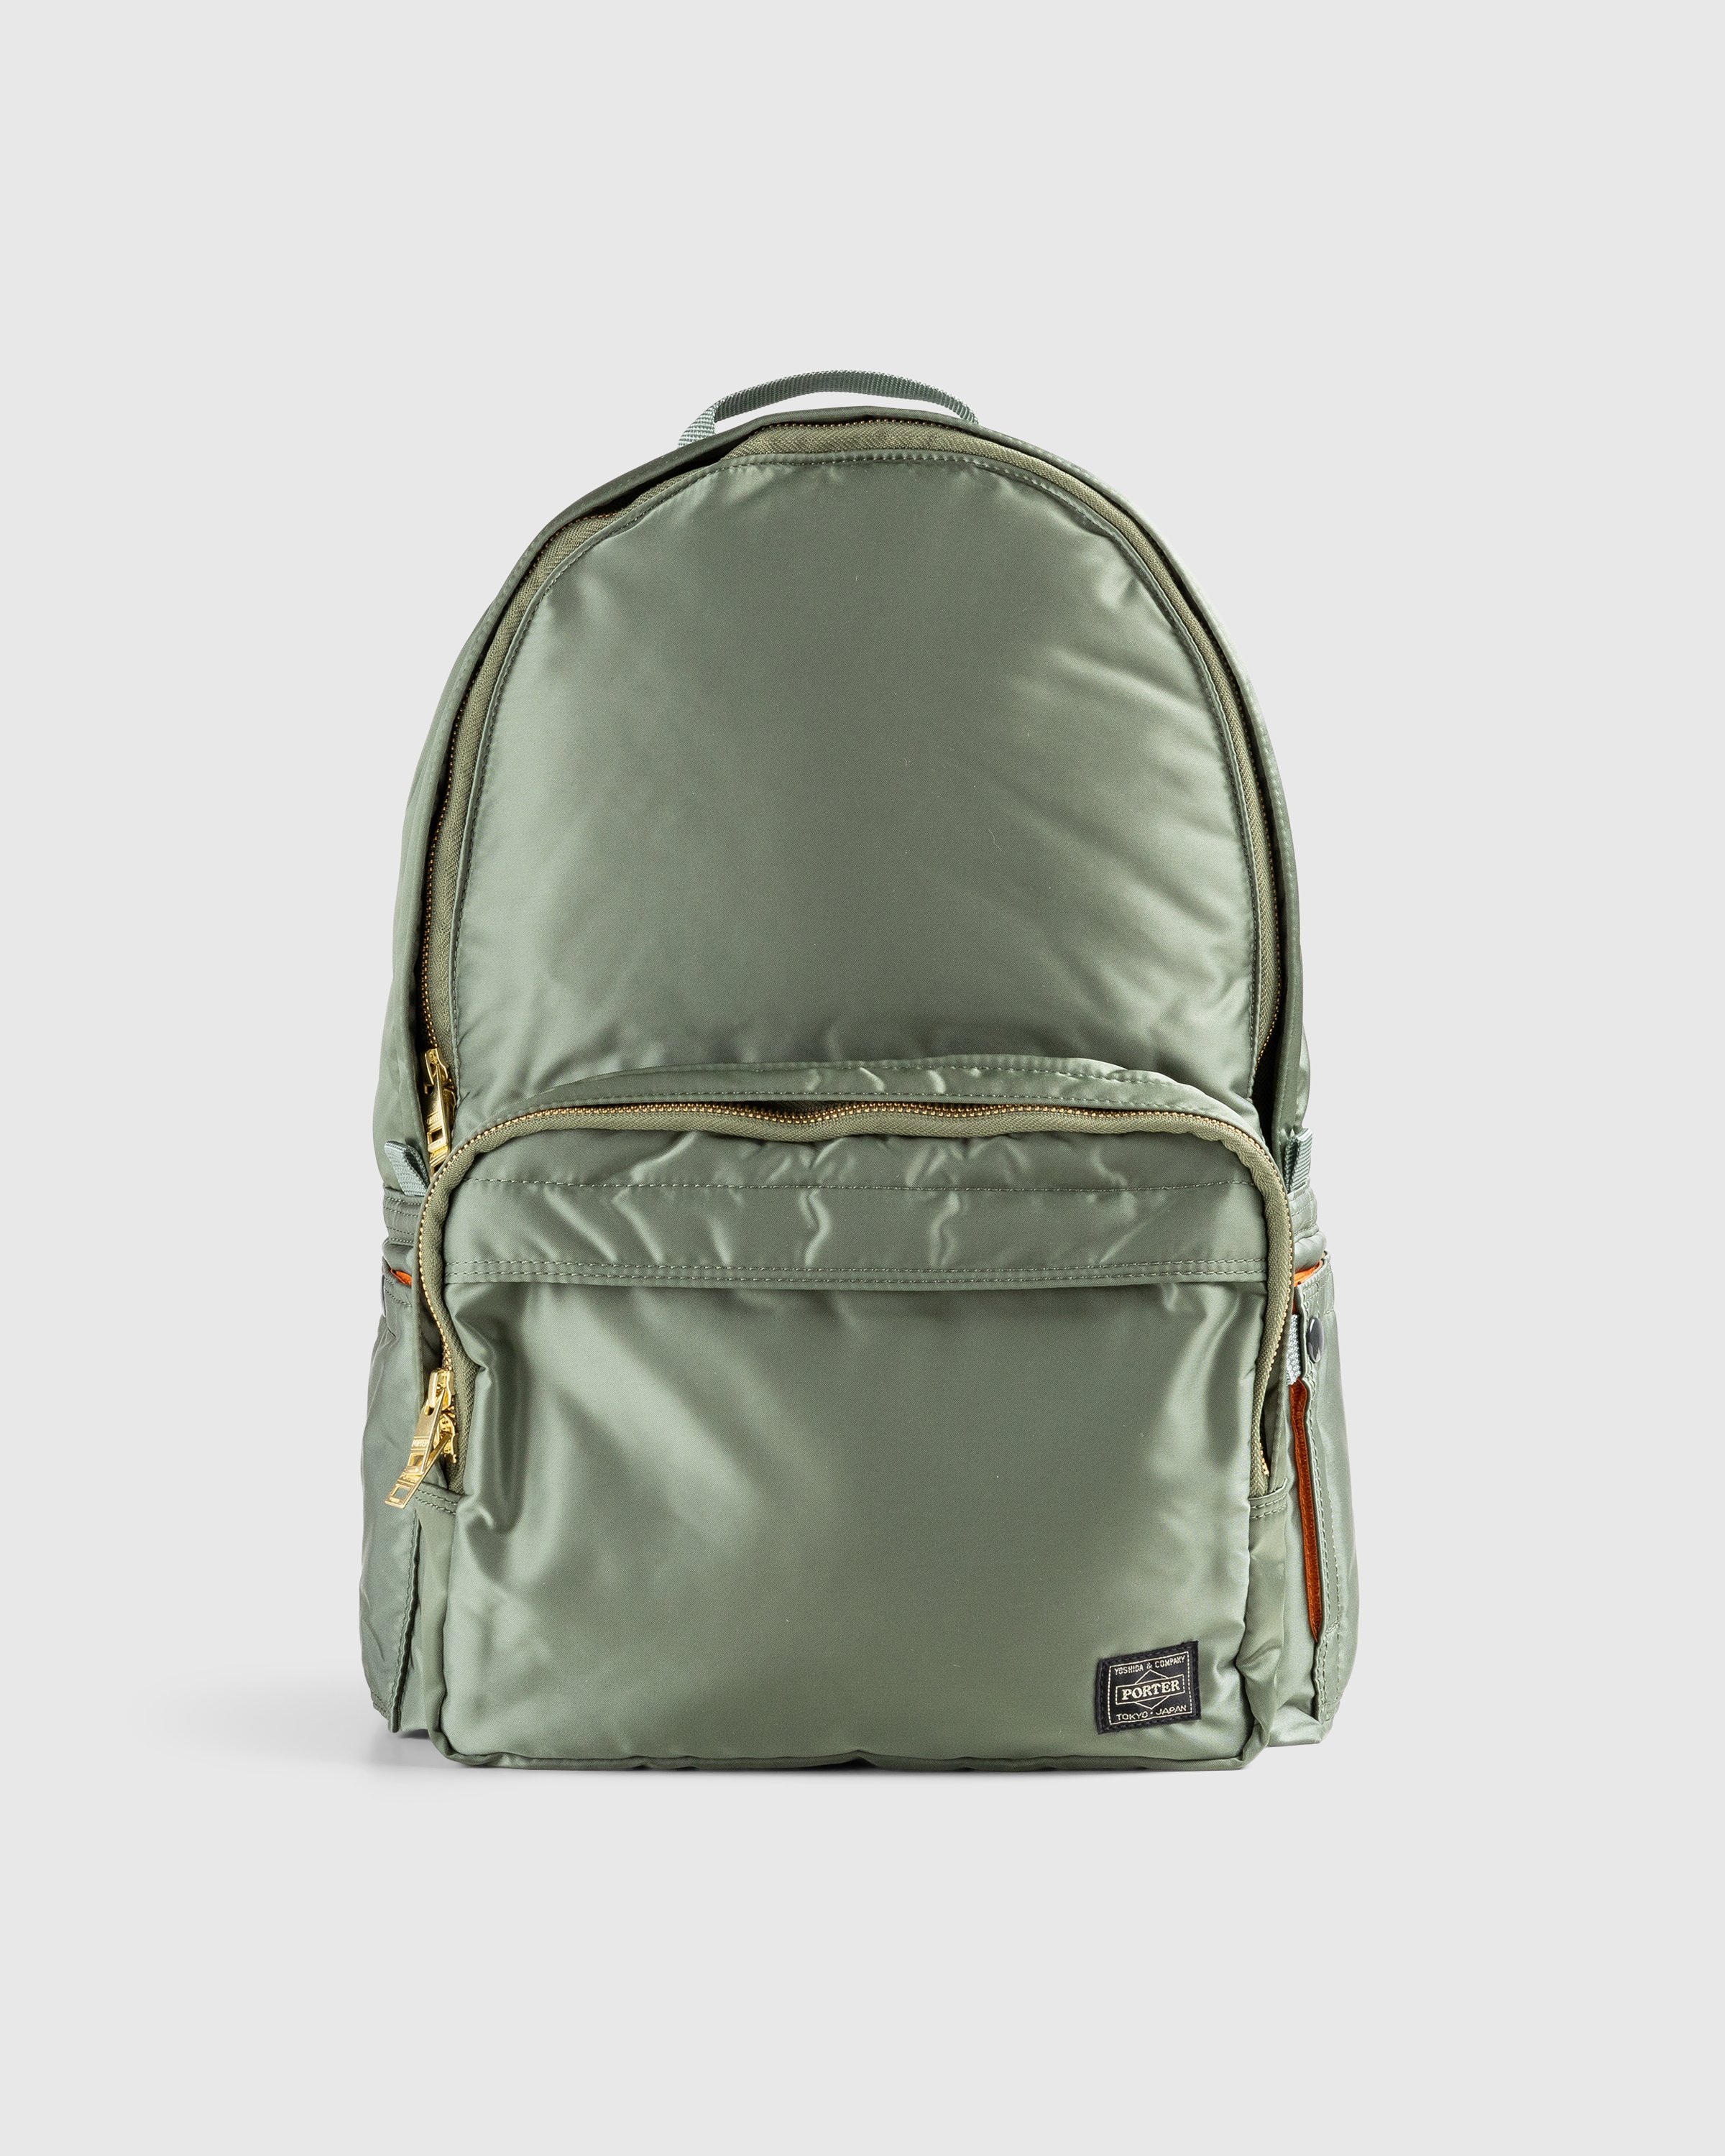 Porter-Yoshida & Co. - Tanker Day Pack - Accessories - Green - Image 1